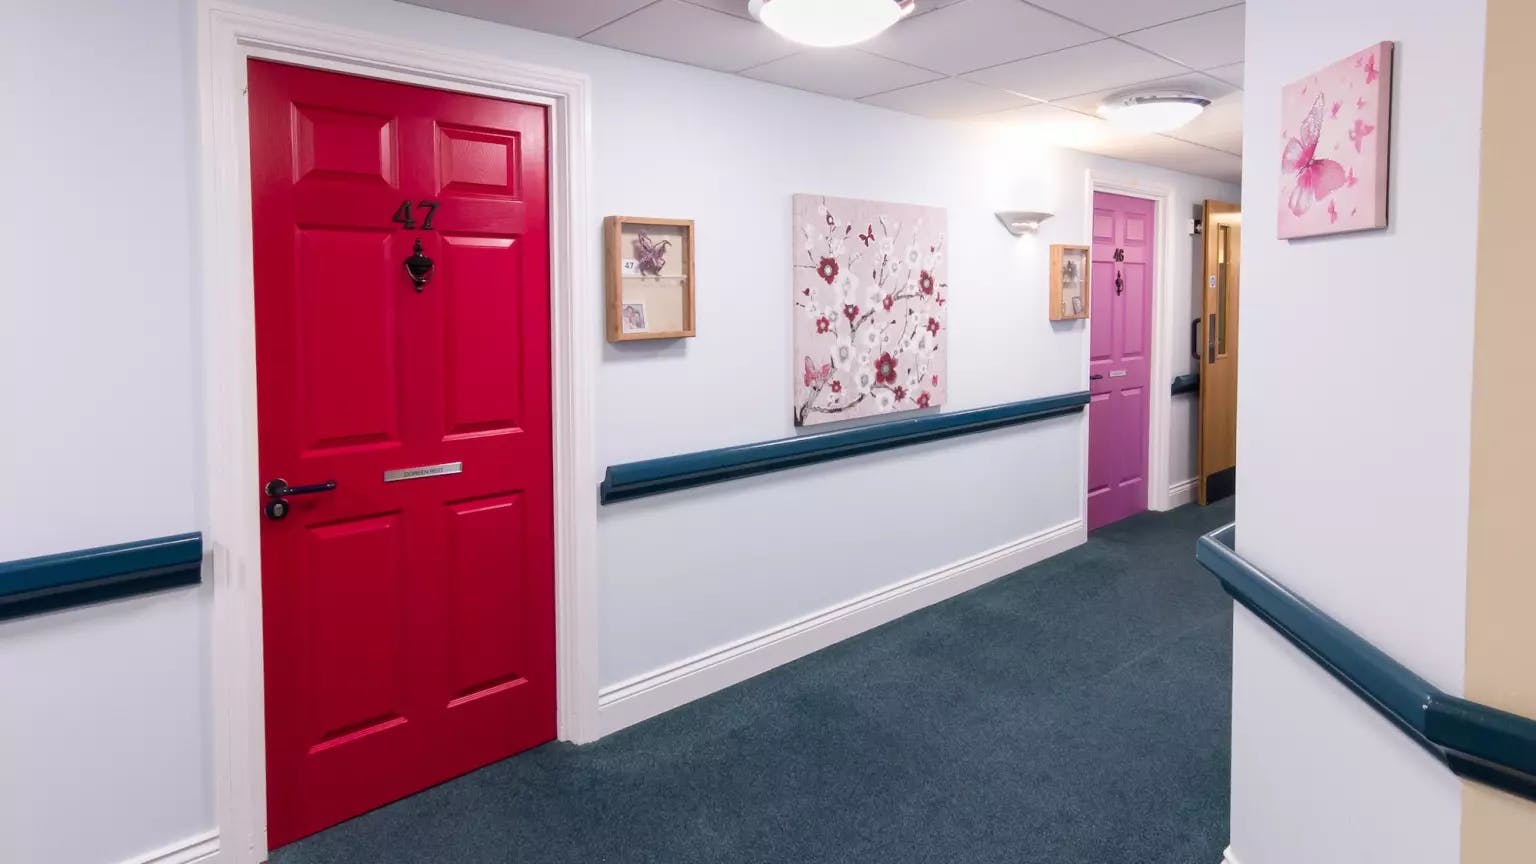 Hallway of Pinewood Lodge care home in Watford, Hertfordshire